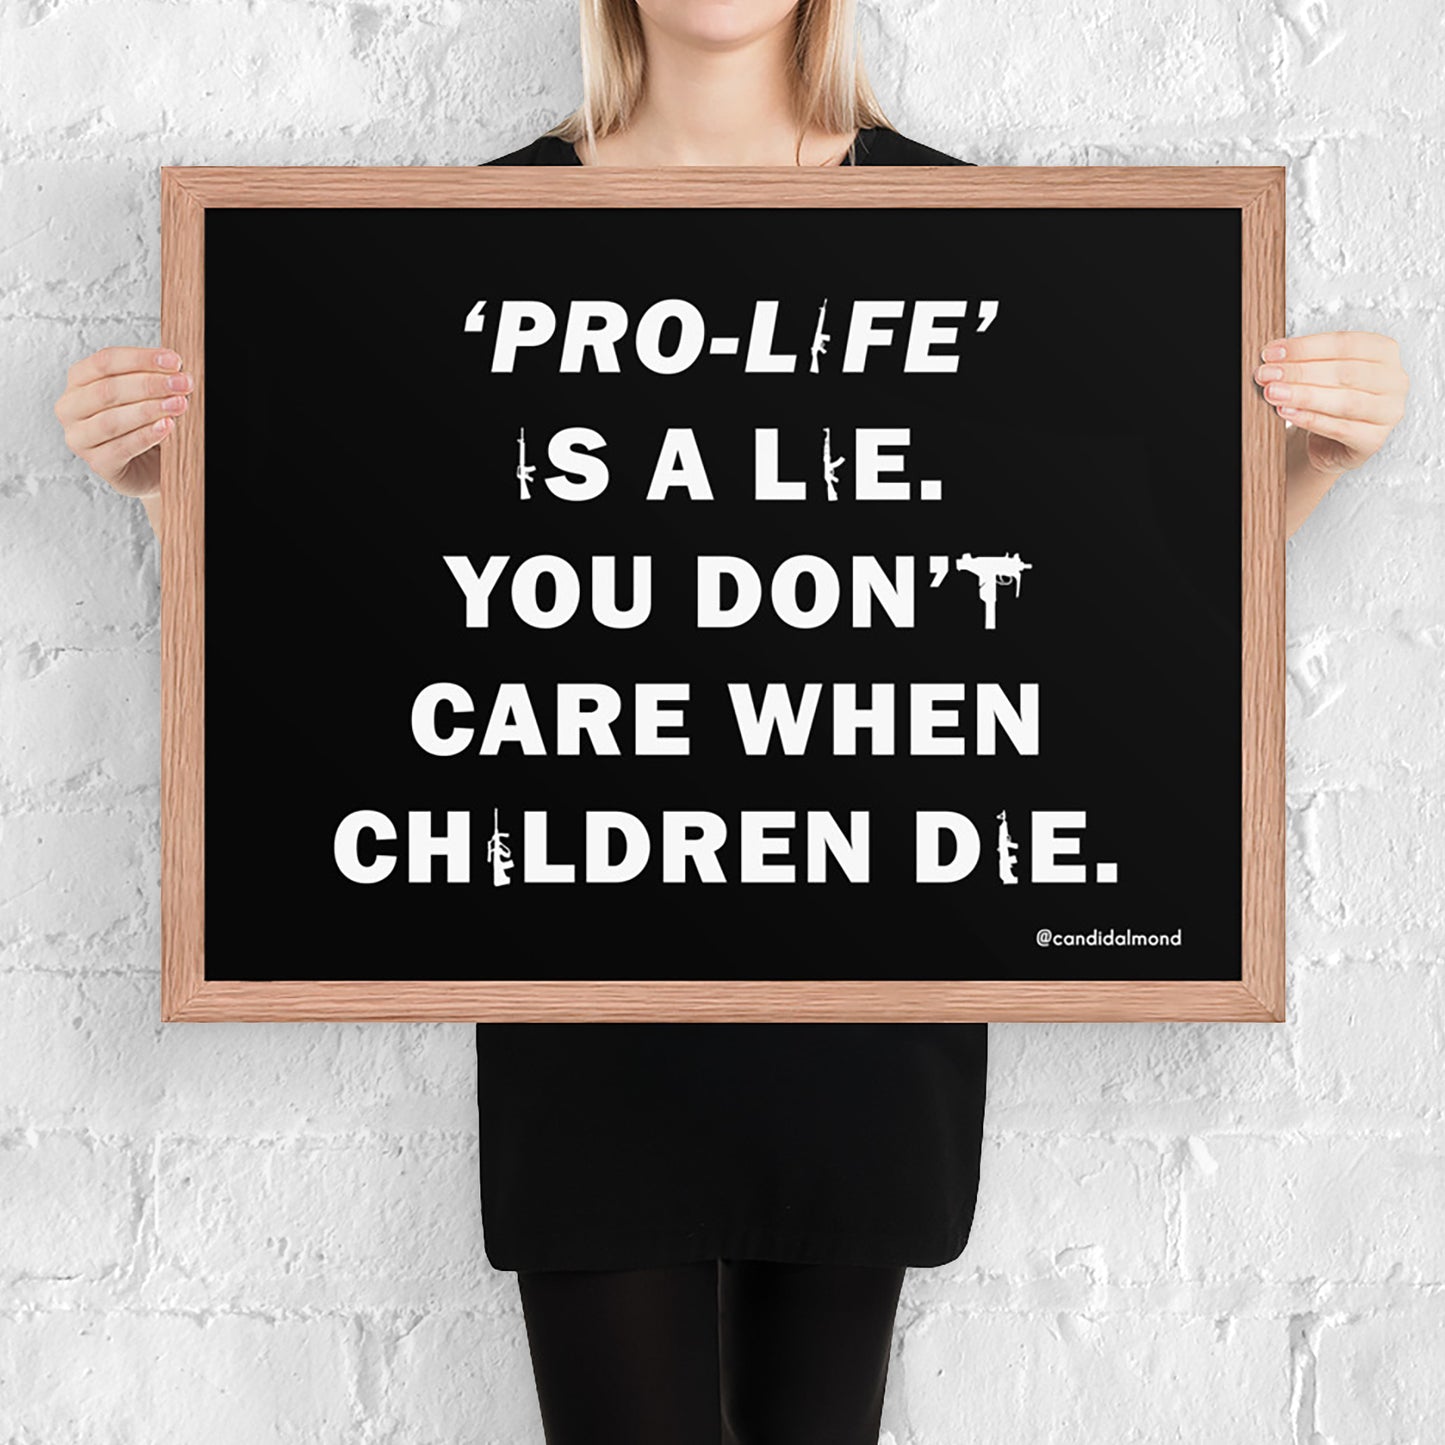 Abortion rights and gun control protest poster, red oak frame, size 24" x 16"